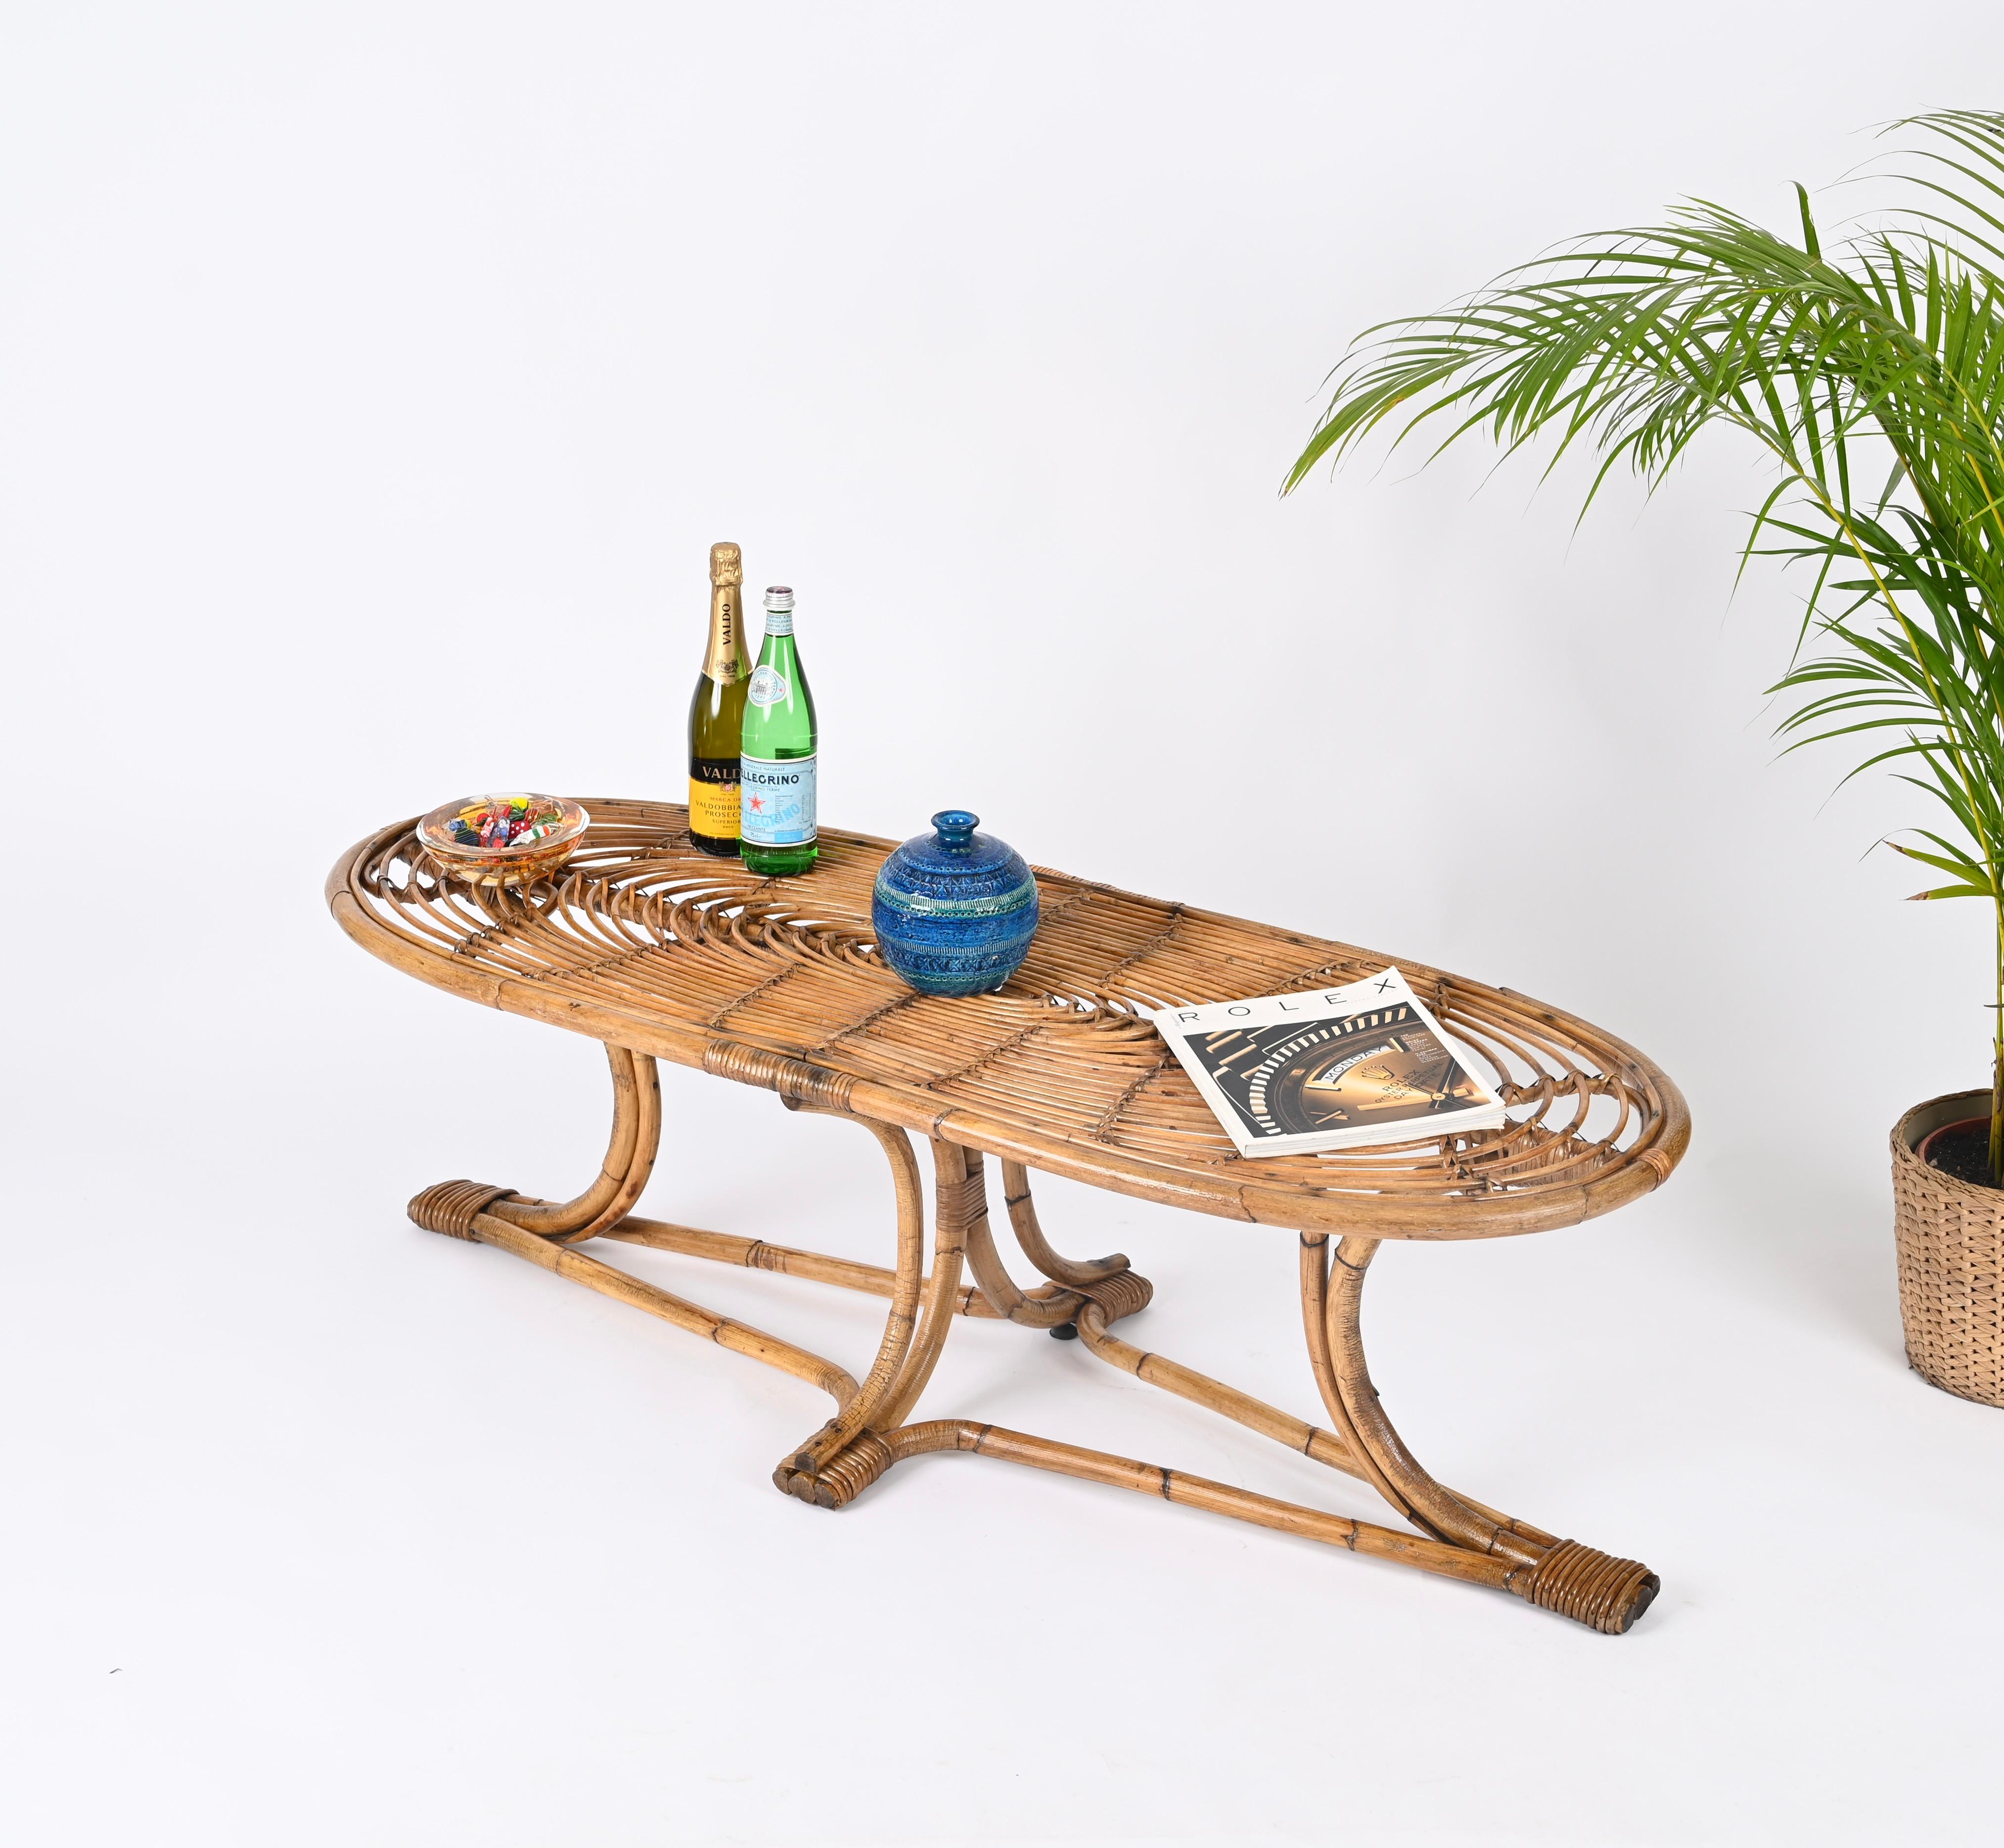 Marvellous large coffee table fully made in curved bamboo, rattan and hand-woven wicker. This fantastic and unique piece was realized in Italy during the 1970s. 

The table features a stunning base with four legs in curved bamboo kept together by